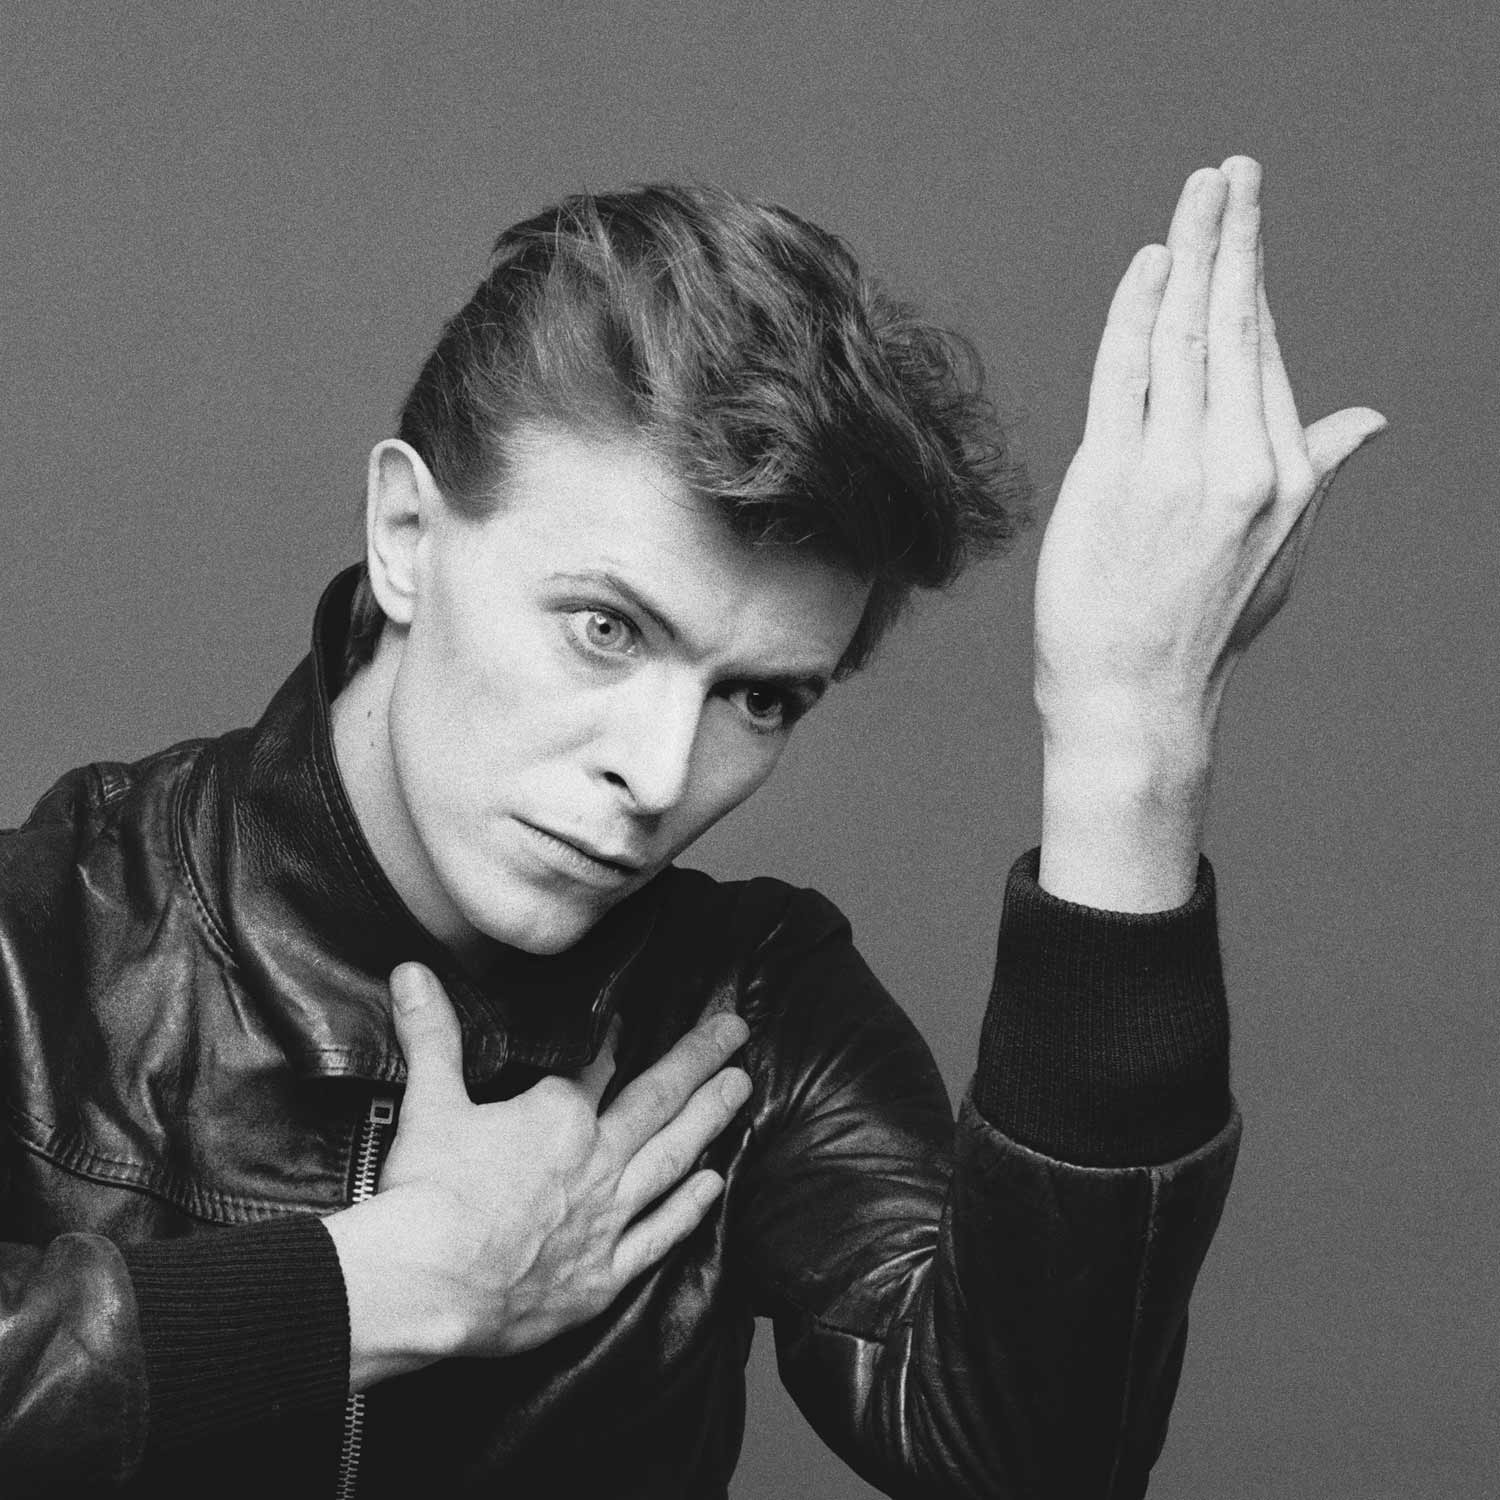 Remembering David Bowie as Both Genius and Flawed Human